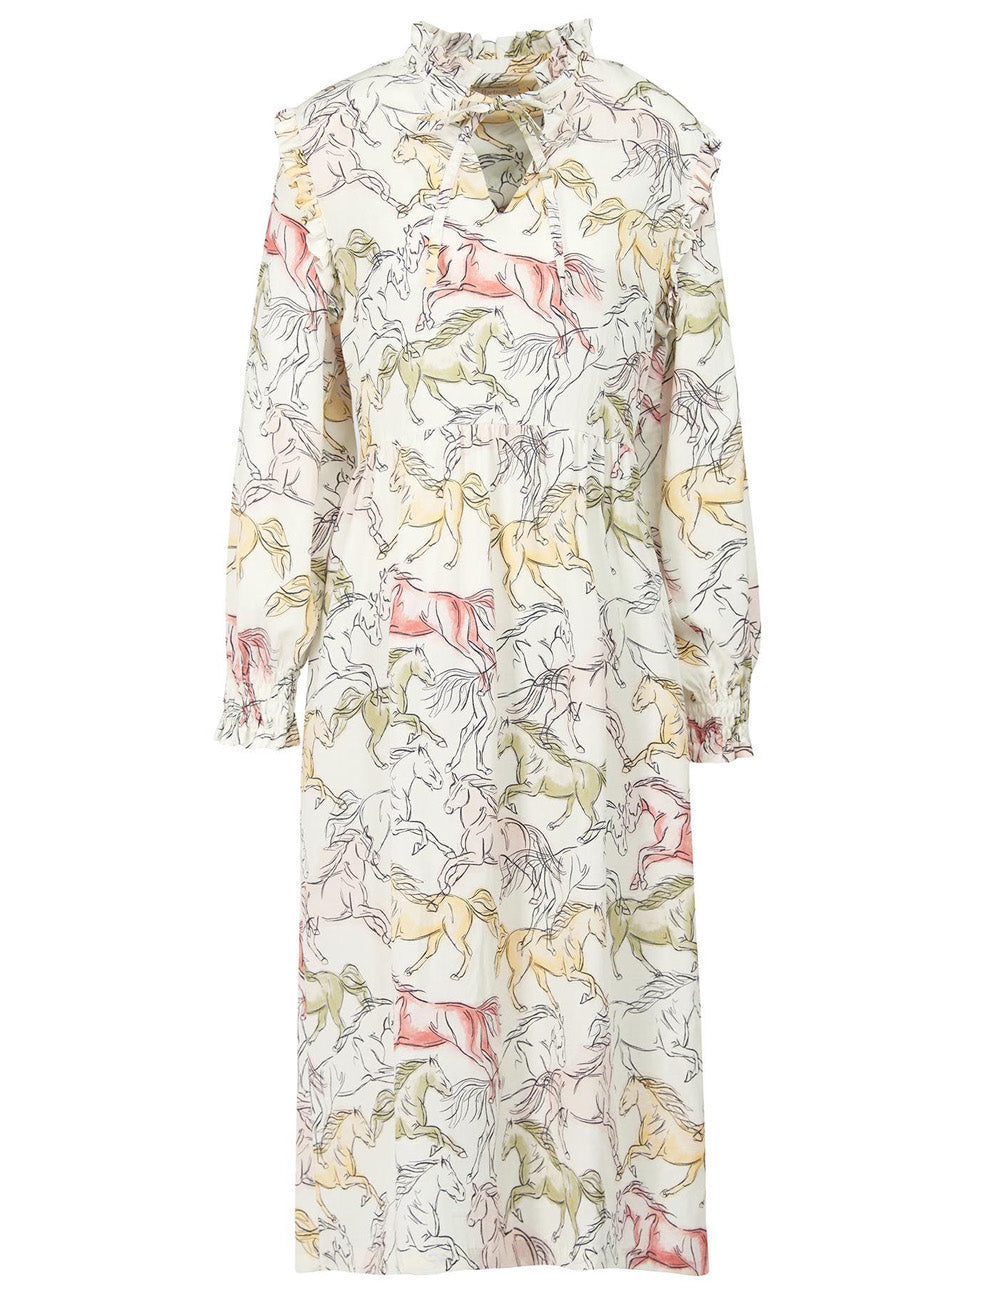 Barbour Regia Dress on a white background